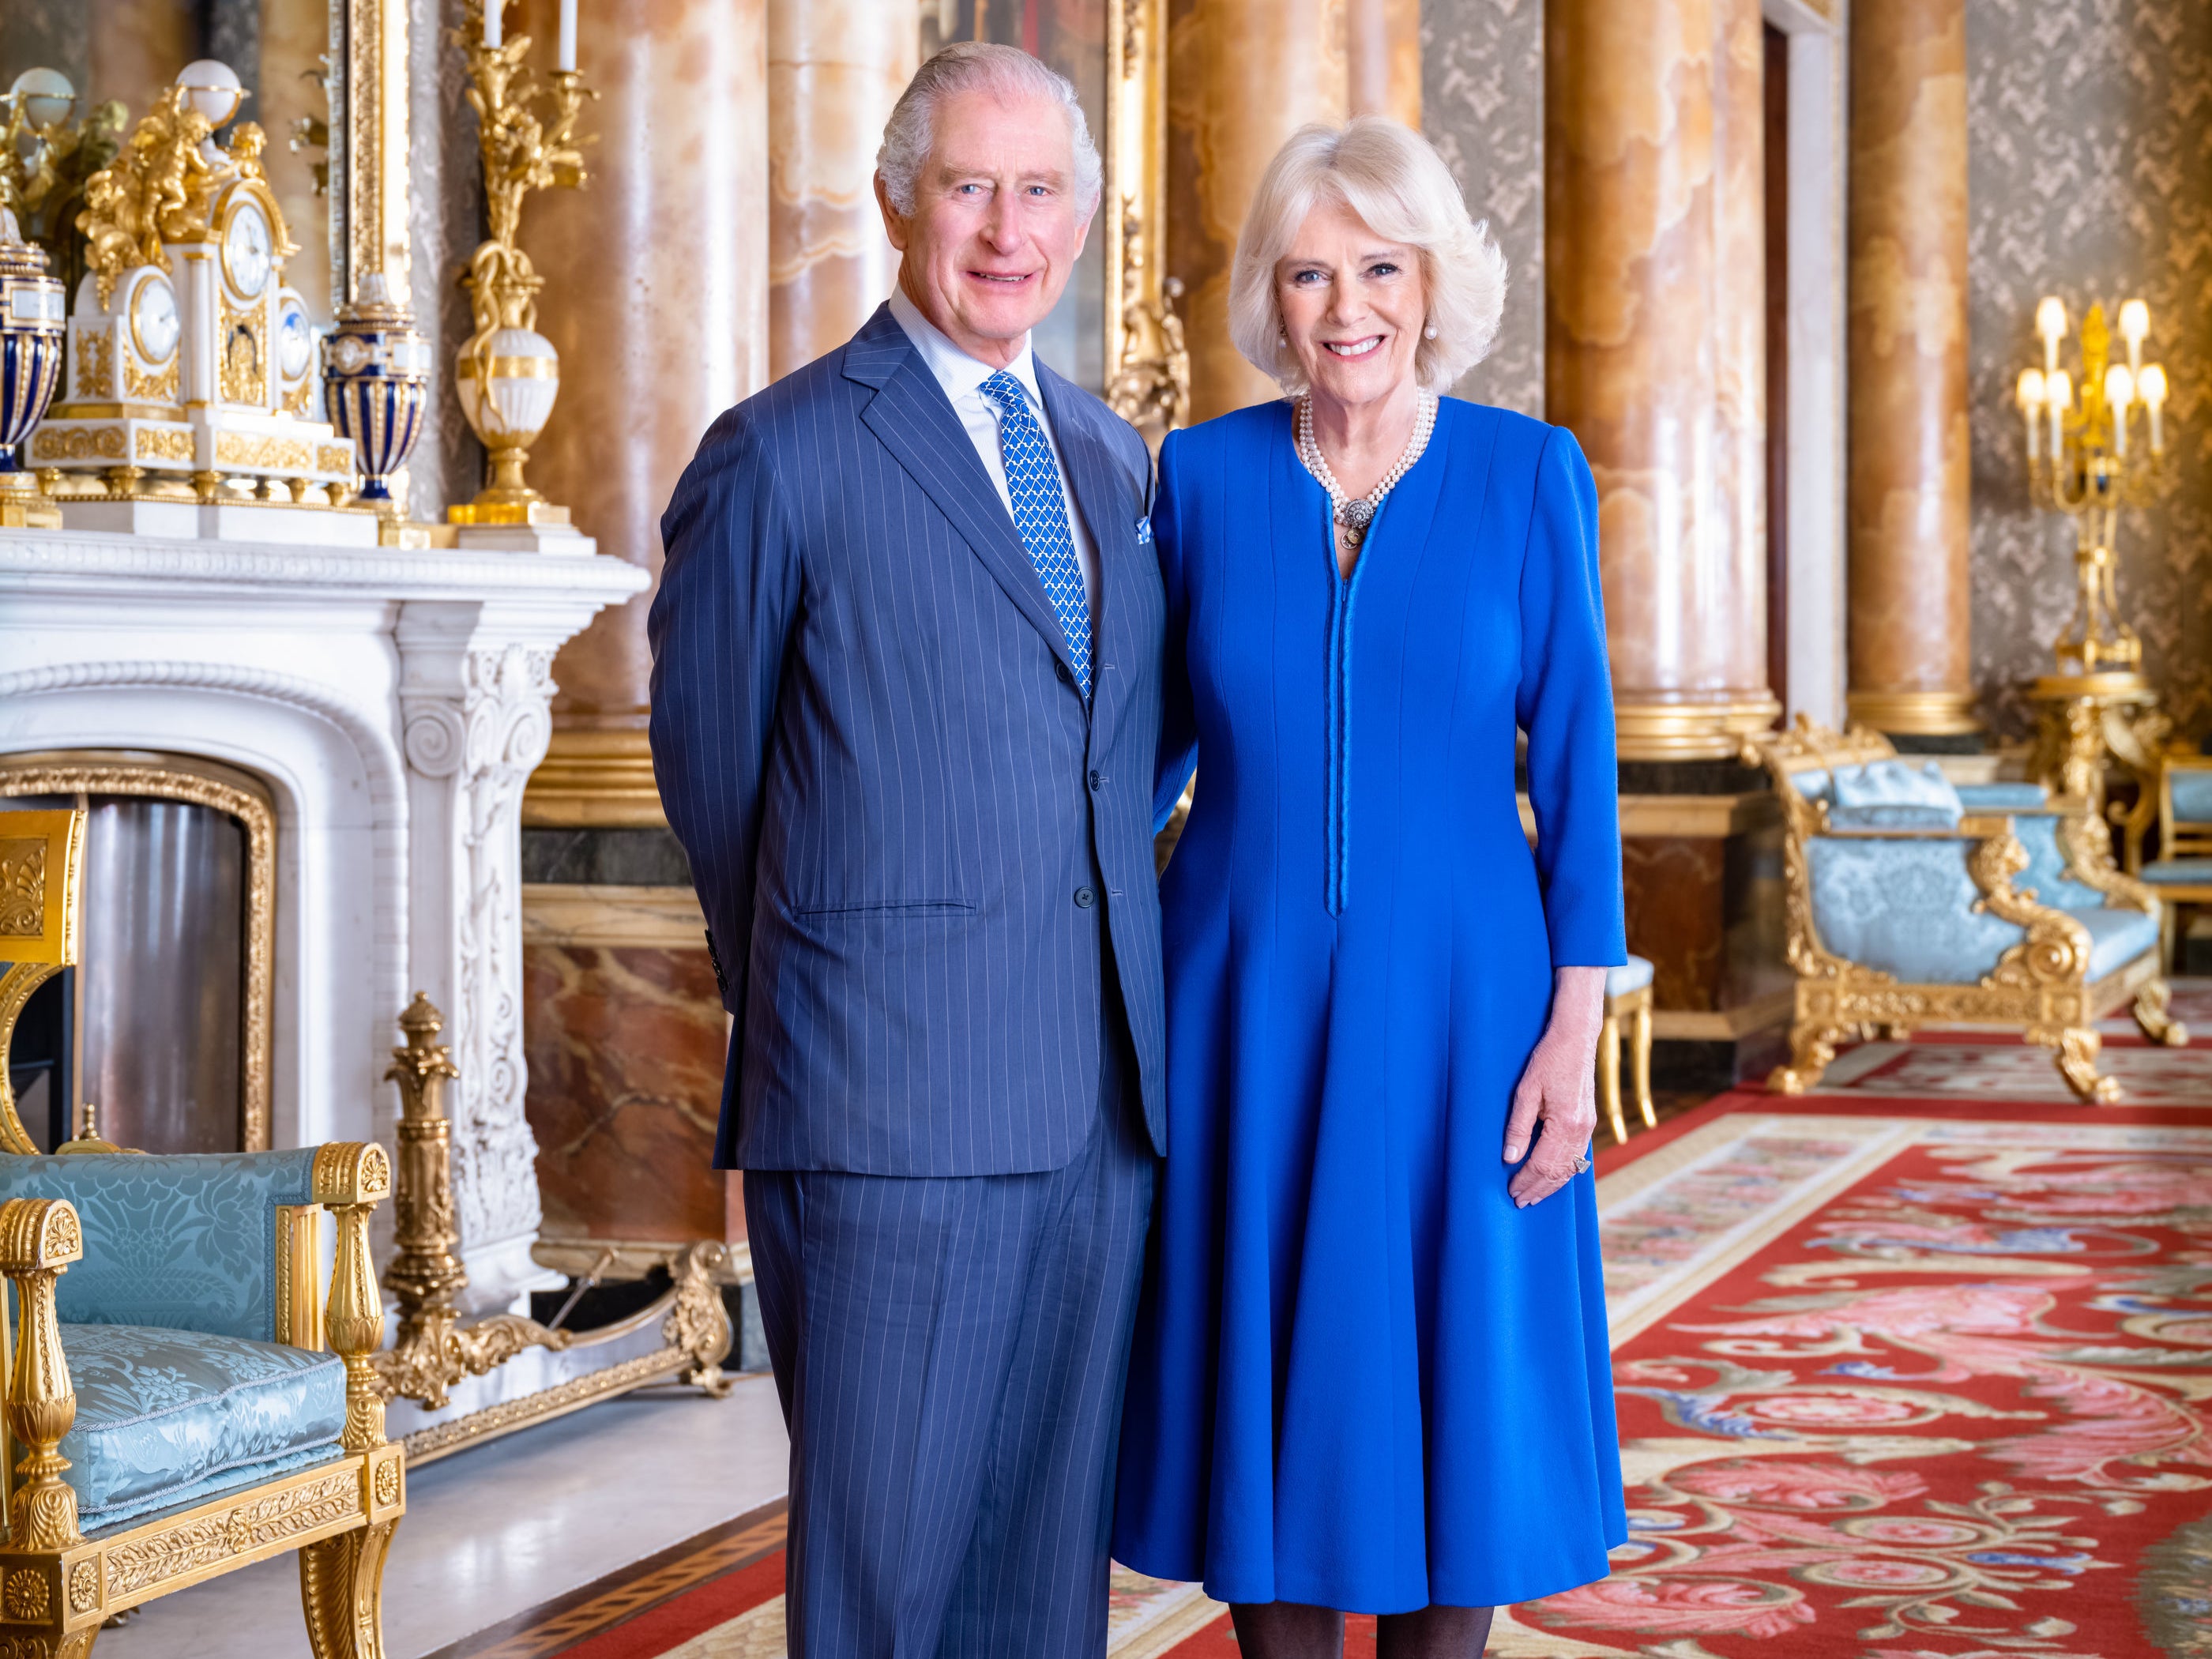 Handout photo issued by Buckingham Palace of King Charles III and the Queen Consort taken by Hugo Burnand in the Blue Drawing Room at Buckingham Palace, London